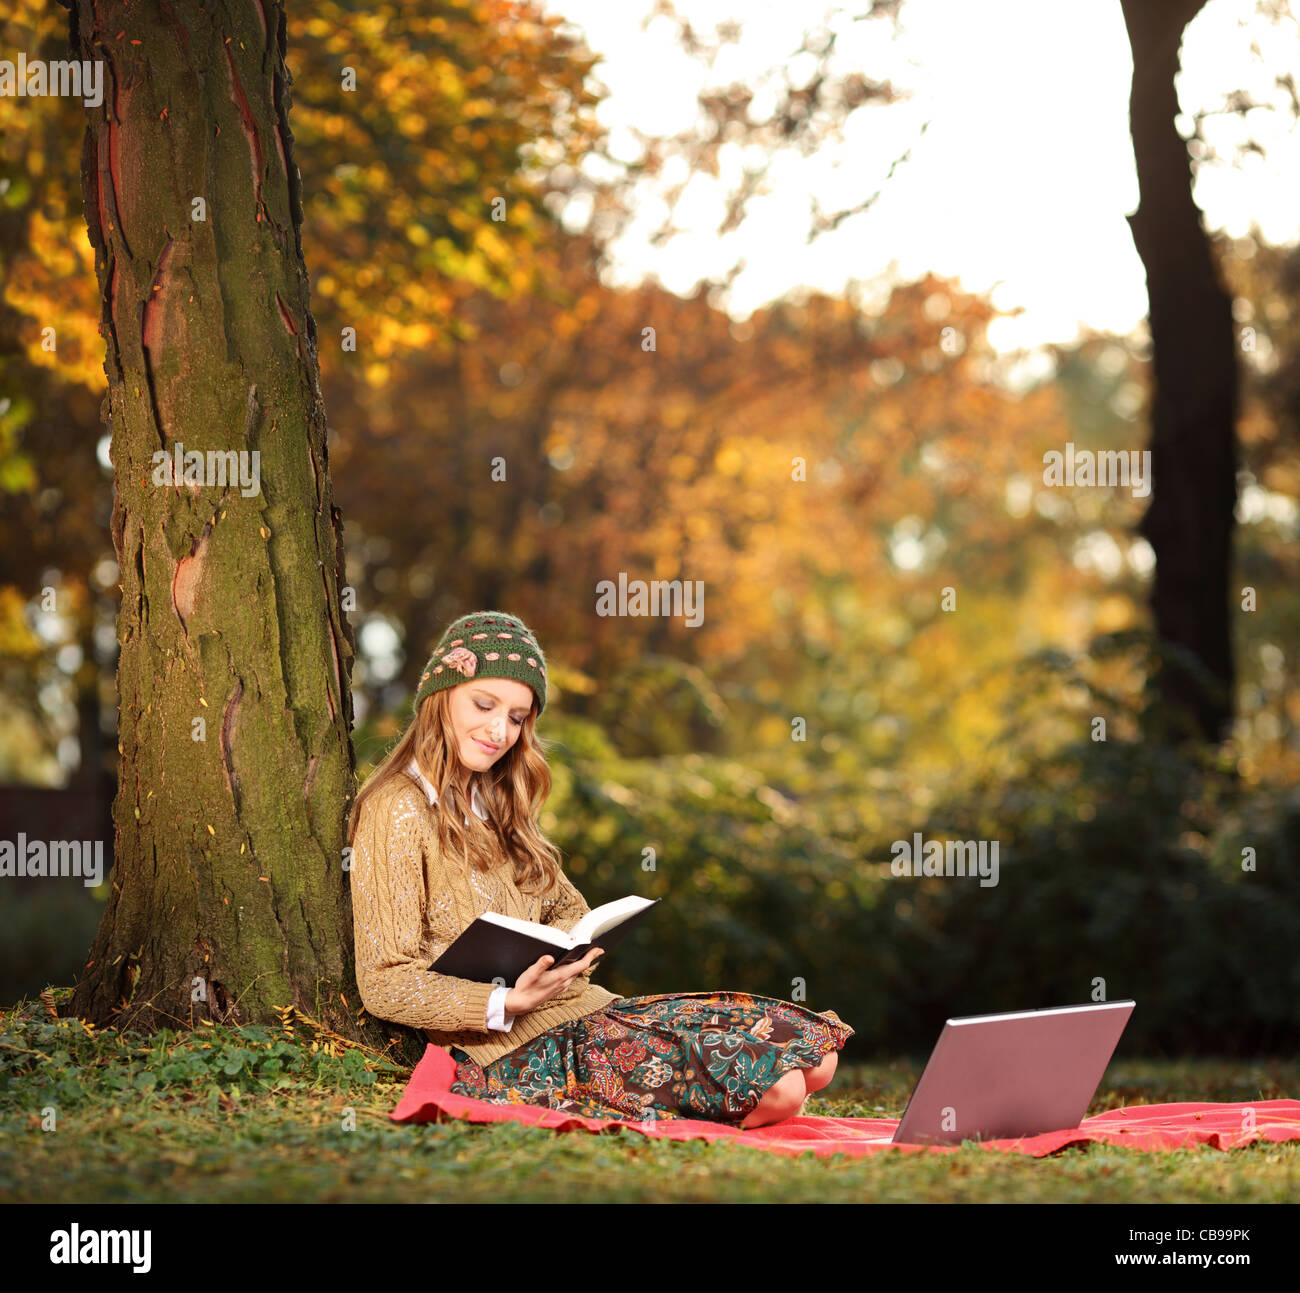 A young woman reading a book Stock Photo